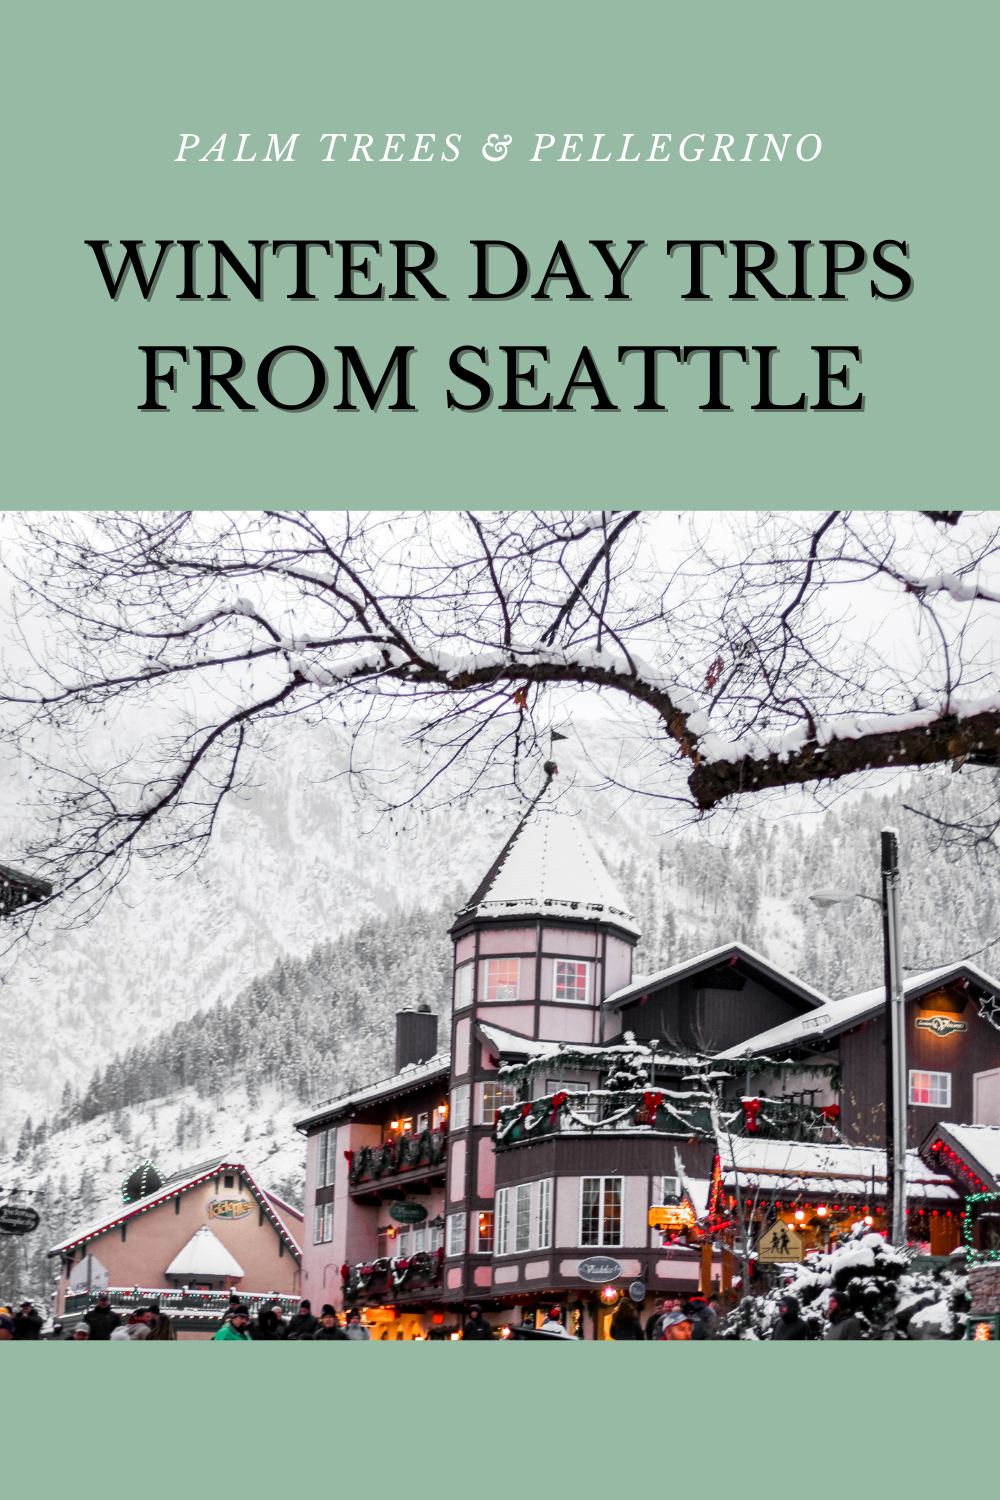 Winter Day Trips from Seattle